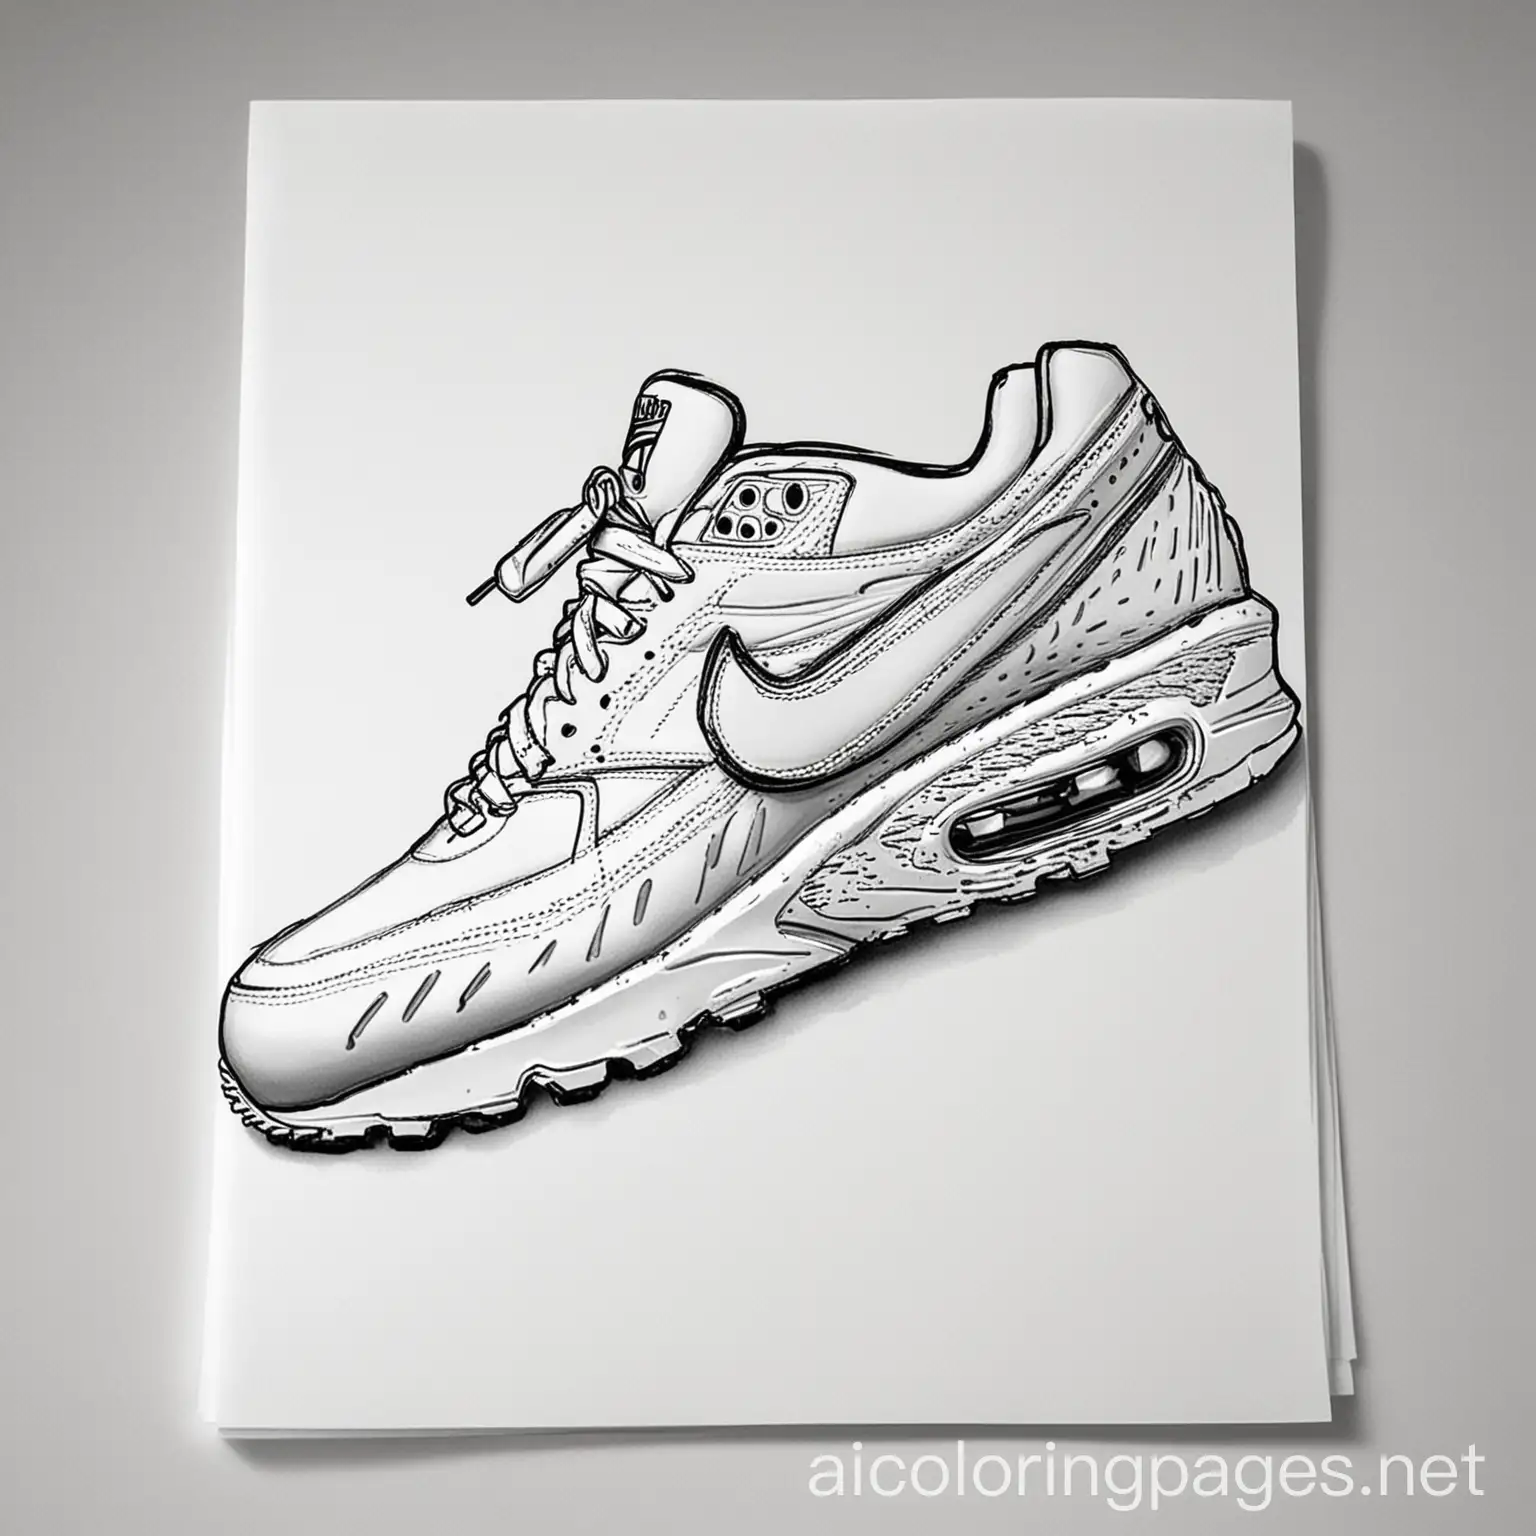 Nike air max BW coloring page, Coloring Page, black and white, line art, white background, Simplicity, Ample White Space. The background of the coloring page is plain white to make it easy for young children to color within the lines. The outlines of all the subjects are easy to distinguish, making it simple for kids to color without too much difficulty